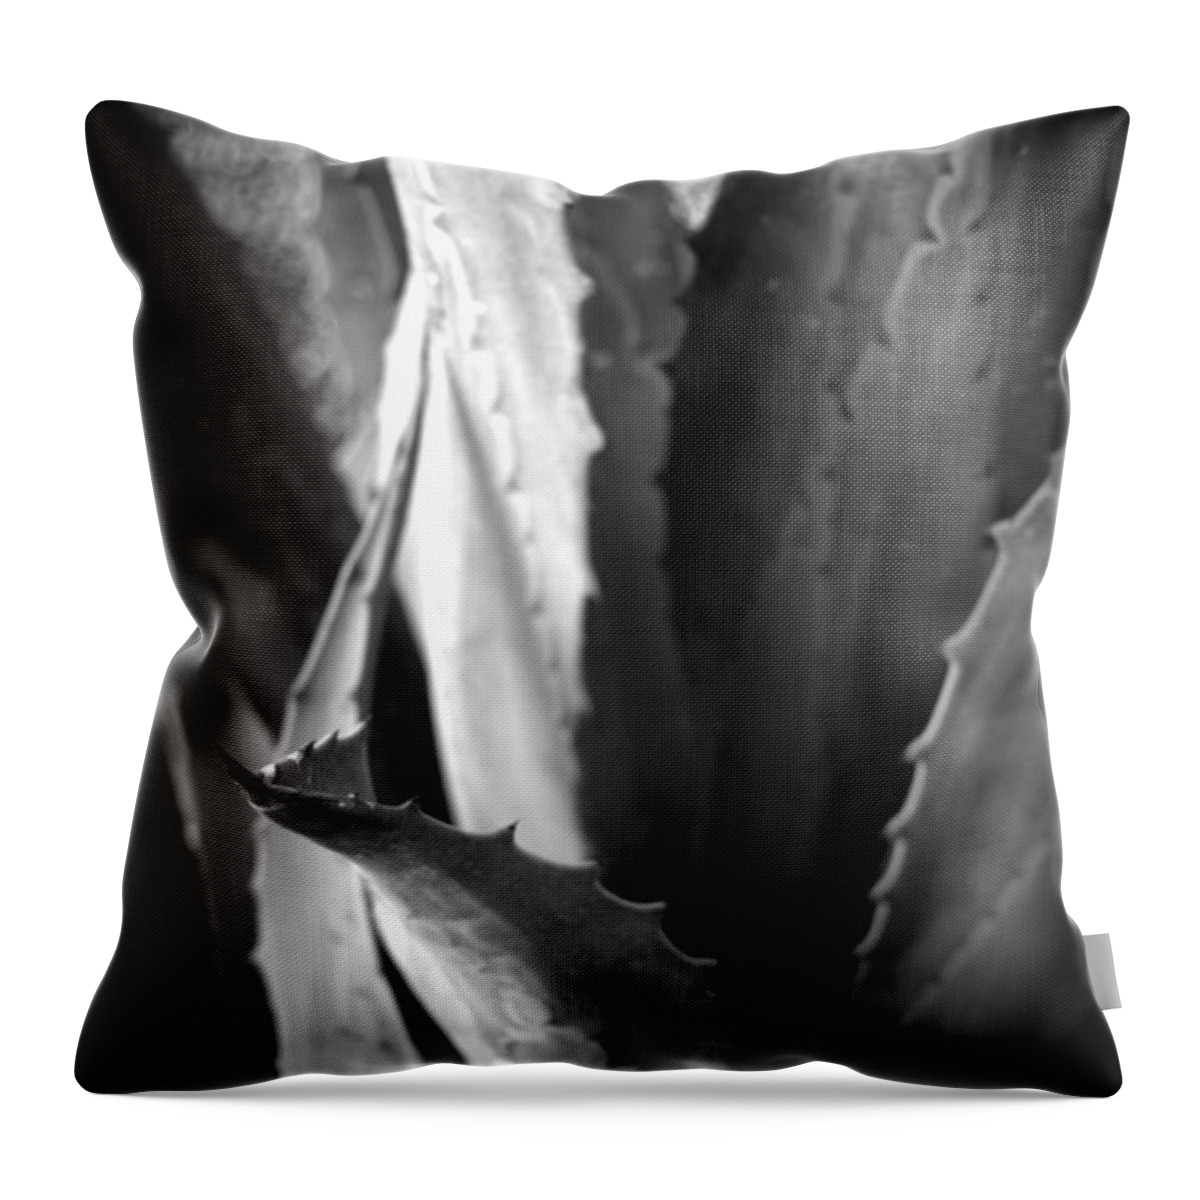 Plant Throw Pillow featuring the photograph Agave Foliage by Nathan Abbott